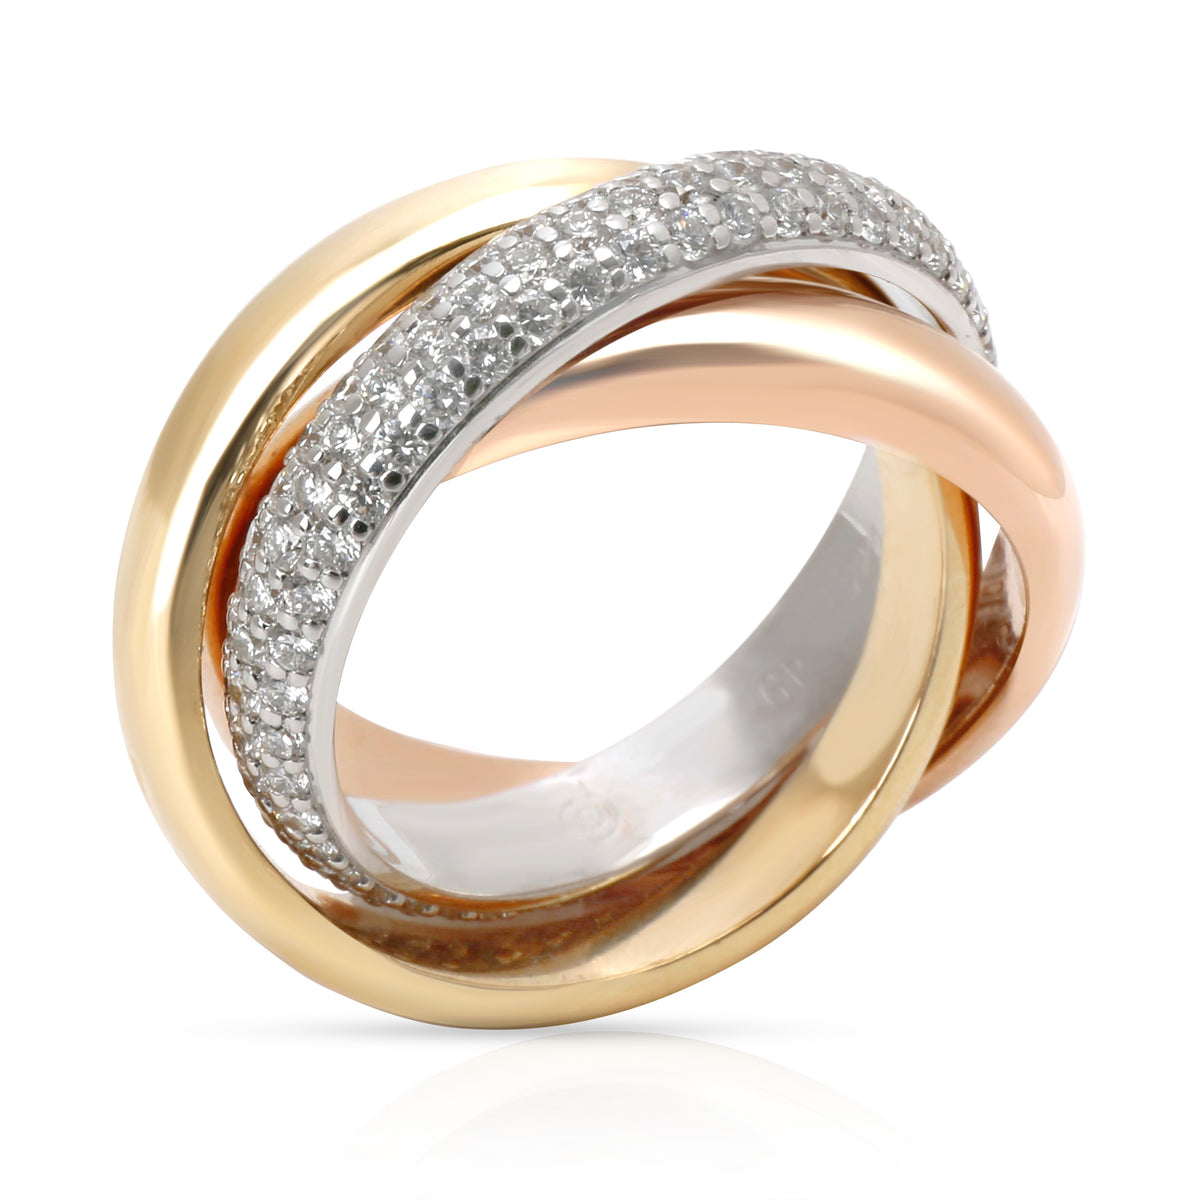 Cartier Trinity Classic Diamond Ring in 18K Yellow, White & Rose Gold (Size 49)